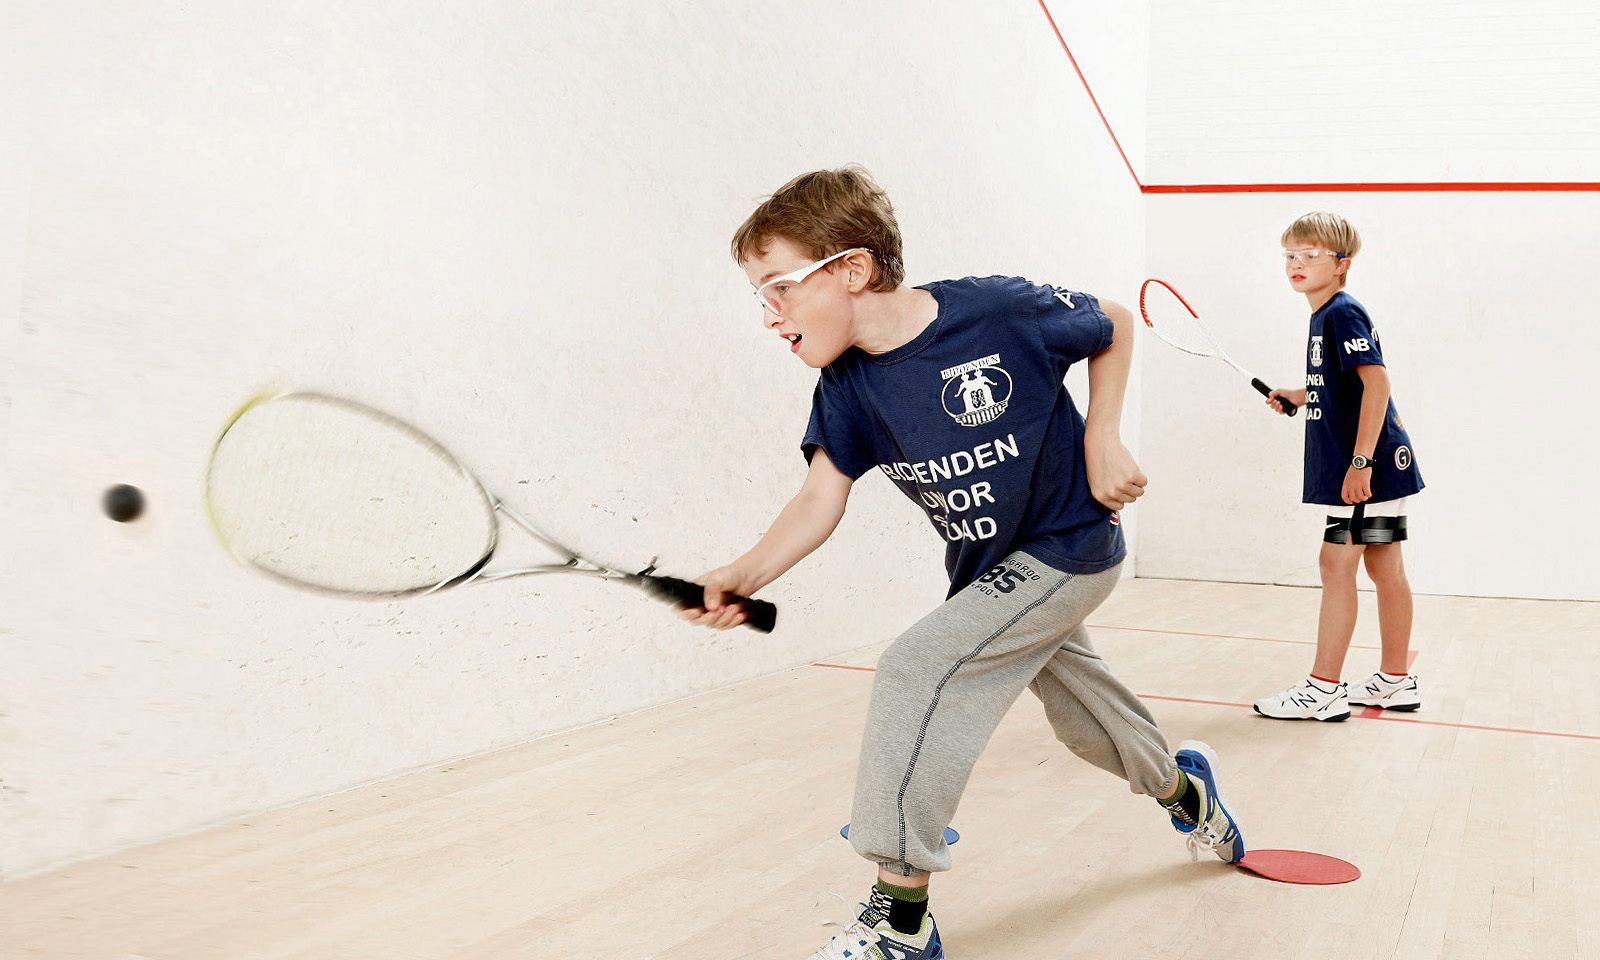 Two of Biddenden Squash Clubs under 9 players in training.